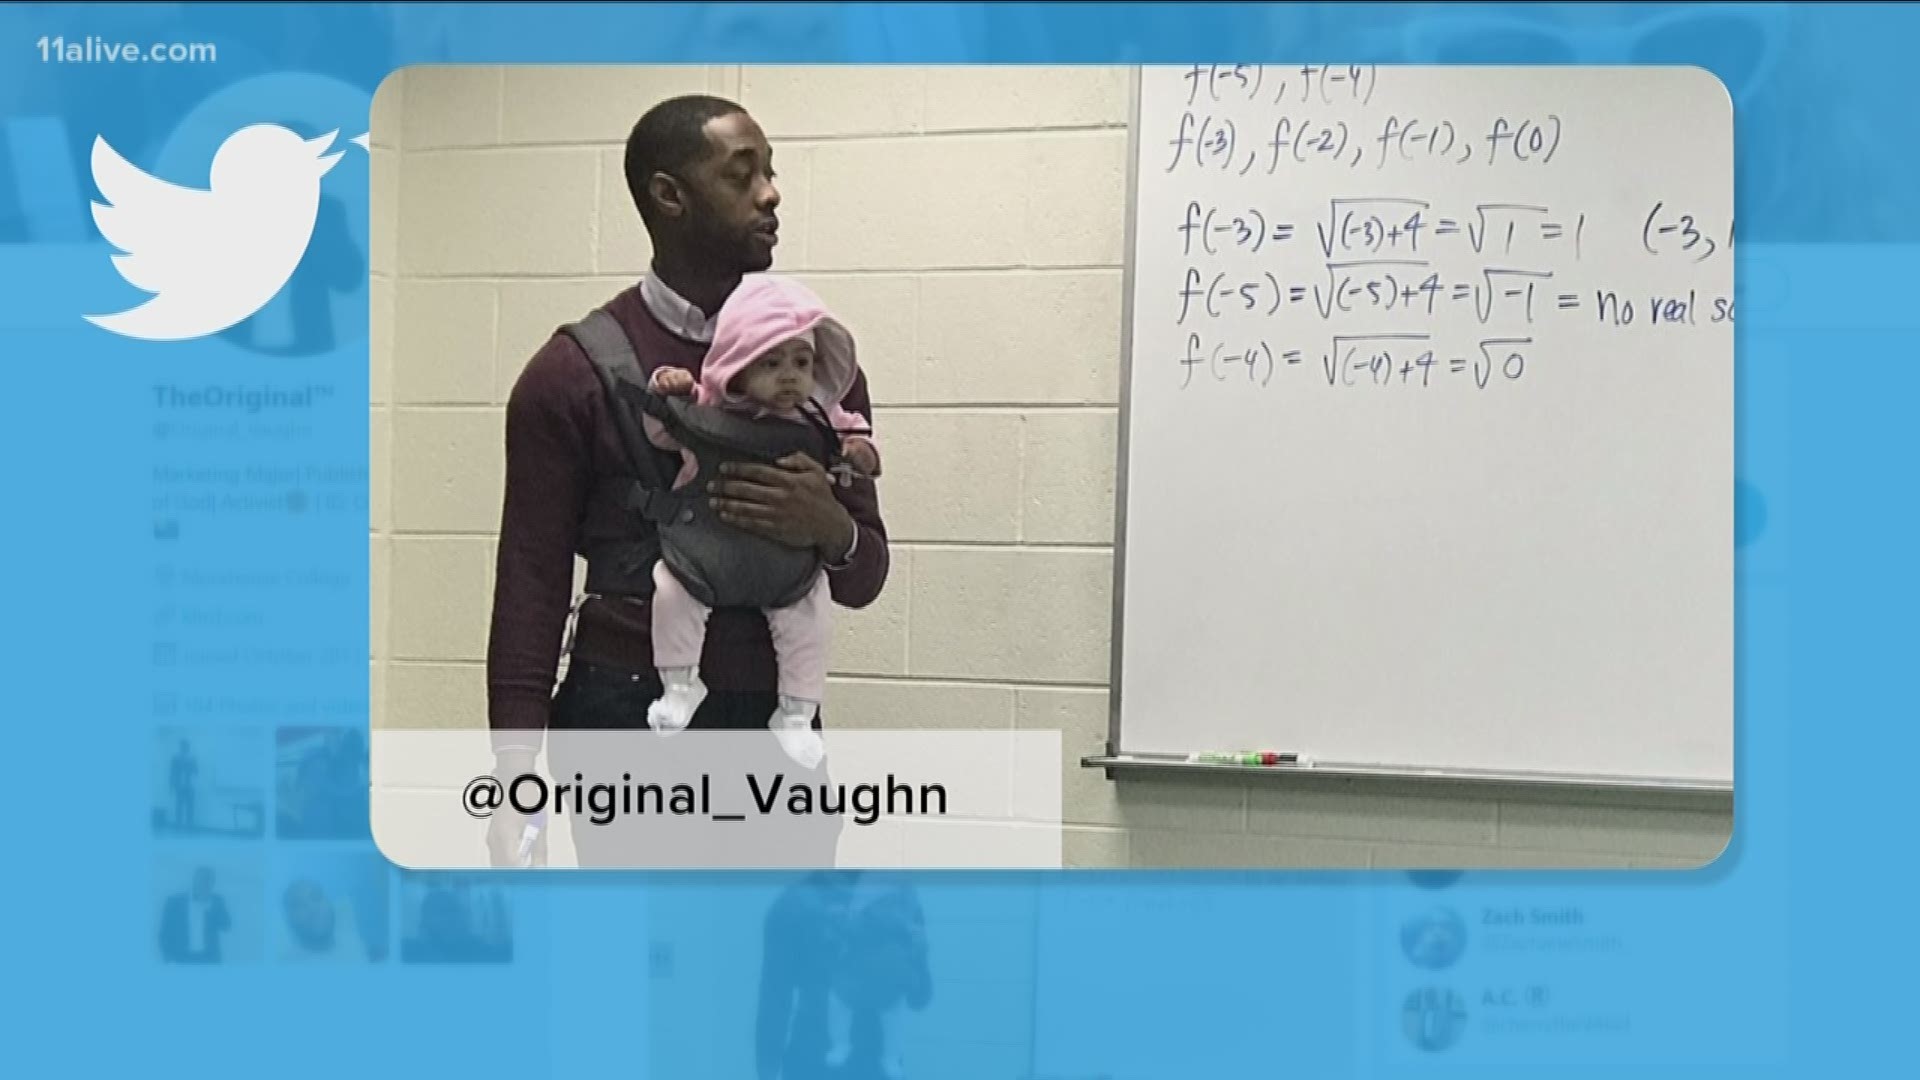 Professor Nathan Alexander had no issues when a student had to bring his child with him. He even cared for the baby throughout the class so dad could take notes.